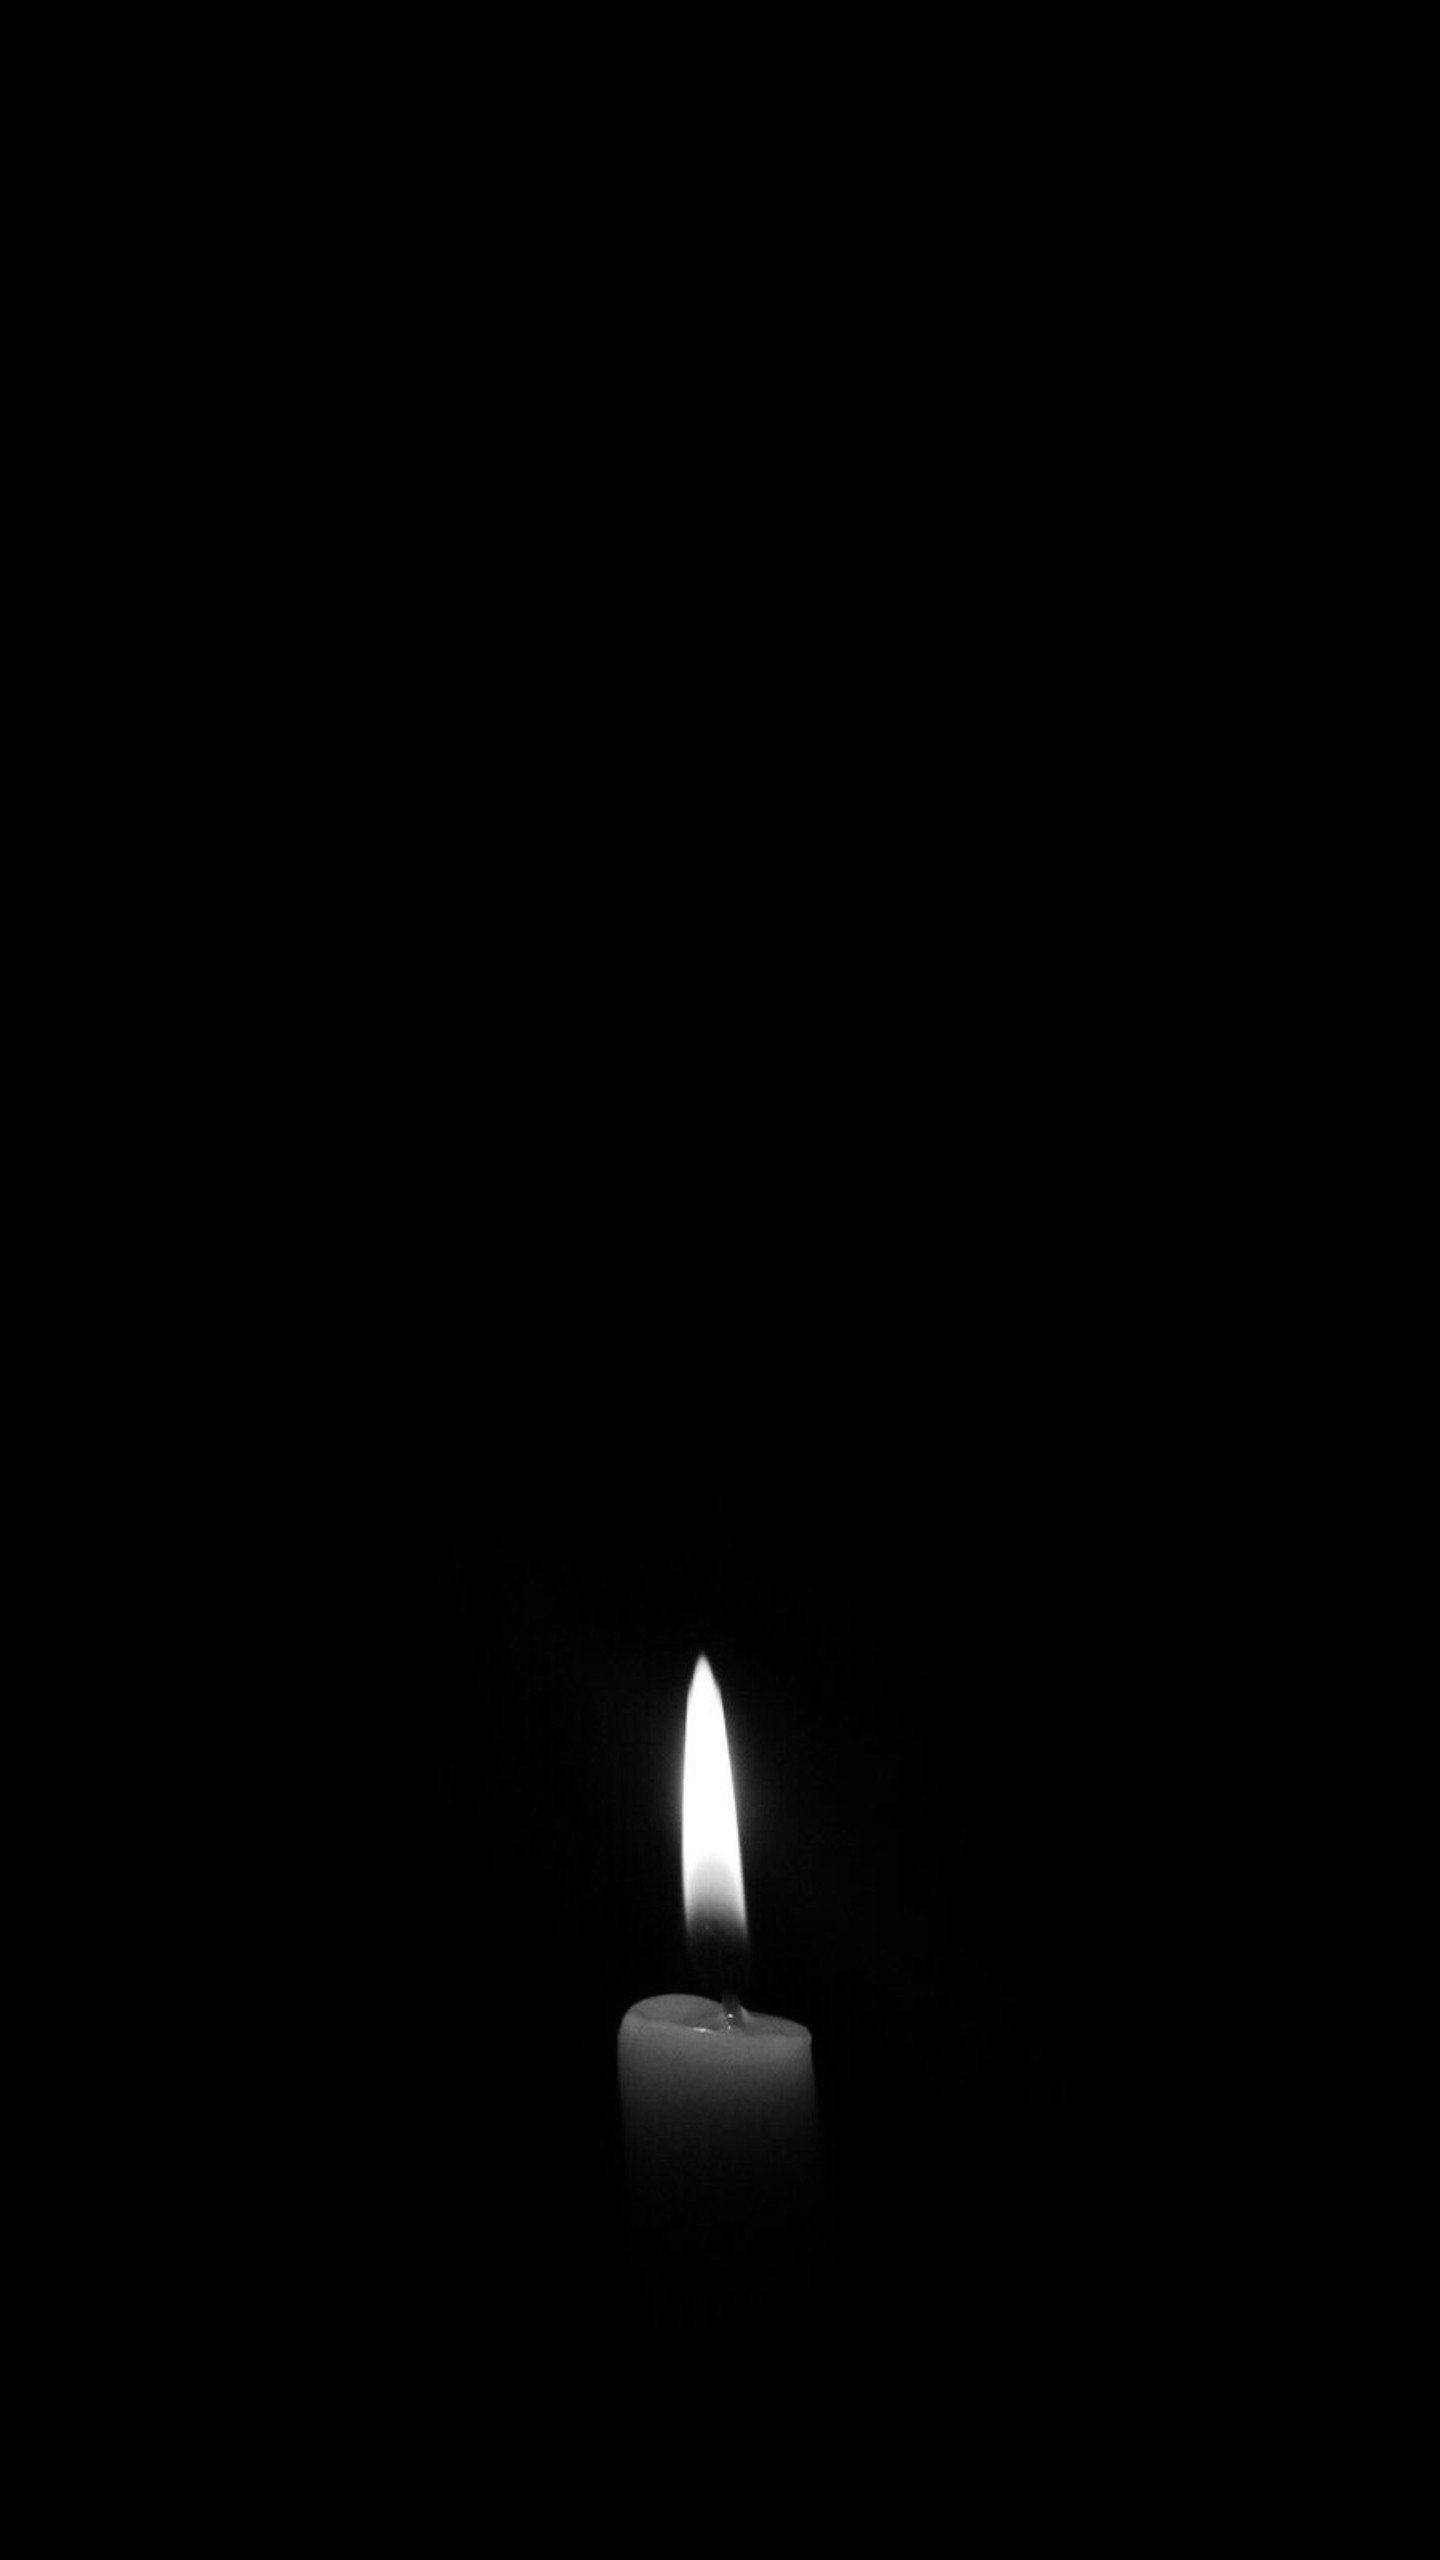 Black Candle Wallpapers - Top Free Black Candle Backgrounds